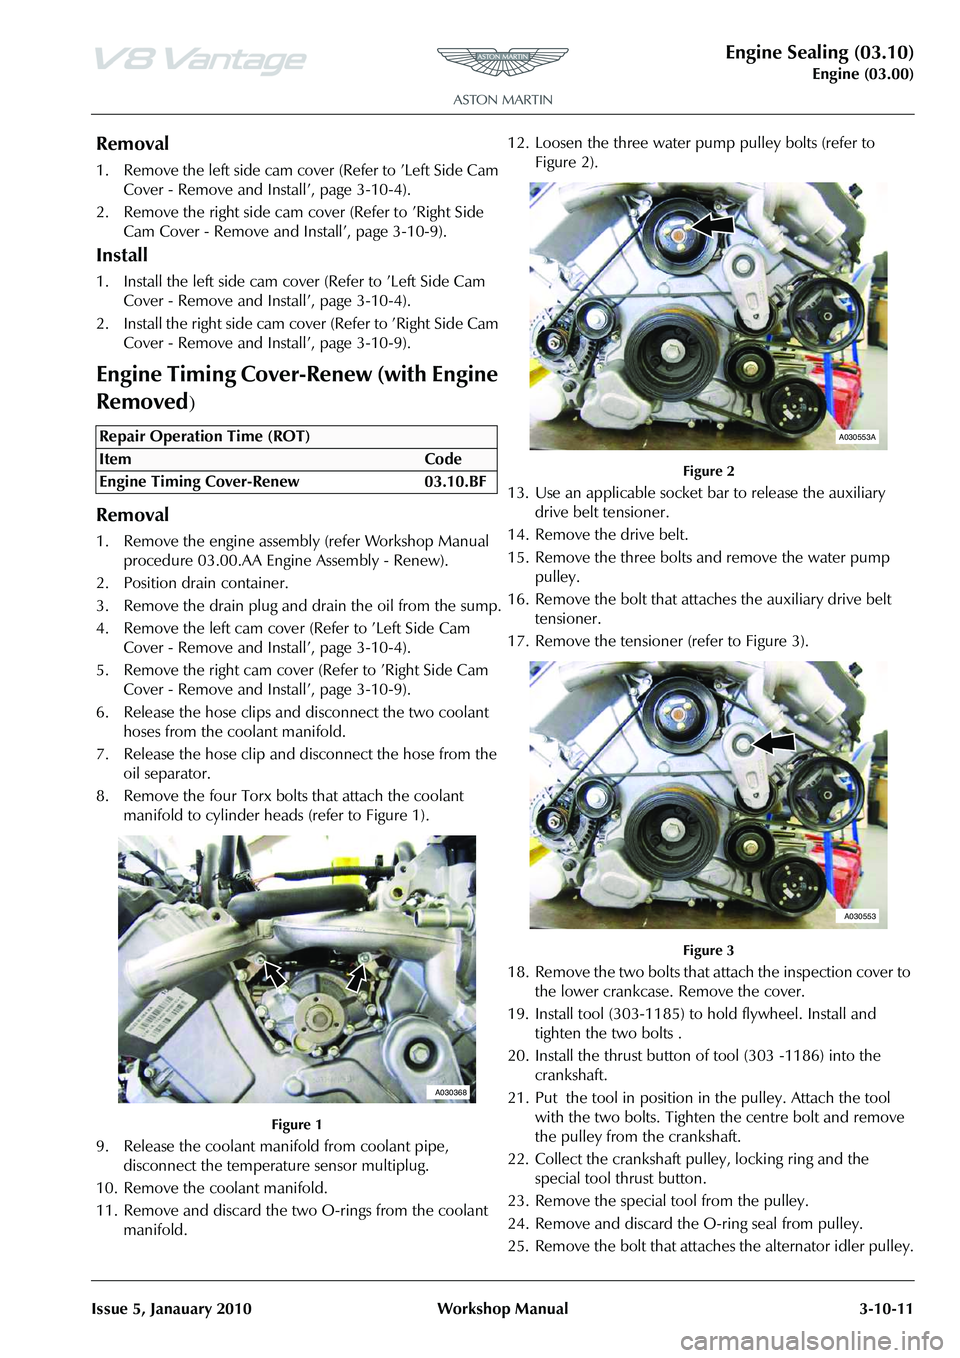 ASTON MARTIN V8 VANTAGE 2010  Workshop Manual Engine Sealing (03.10)
Engine (03.00)
Issue 5, Janauary 2010 Workshop Manual 3-10-11
Removal
1. Remove the left side cam cover (Refer to ’Left Side Cam  Cover - Remove and Install’, page 3-10-4).
